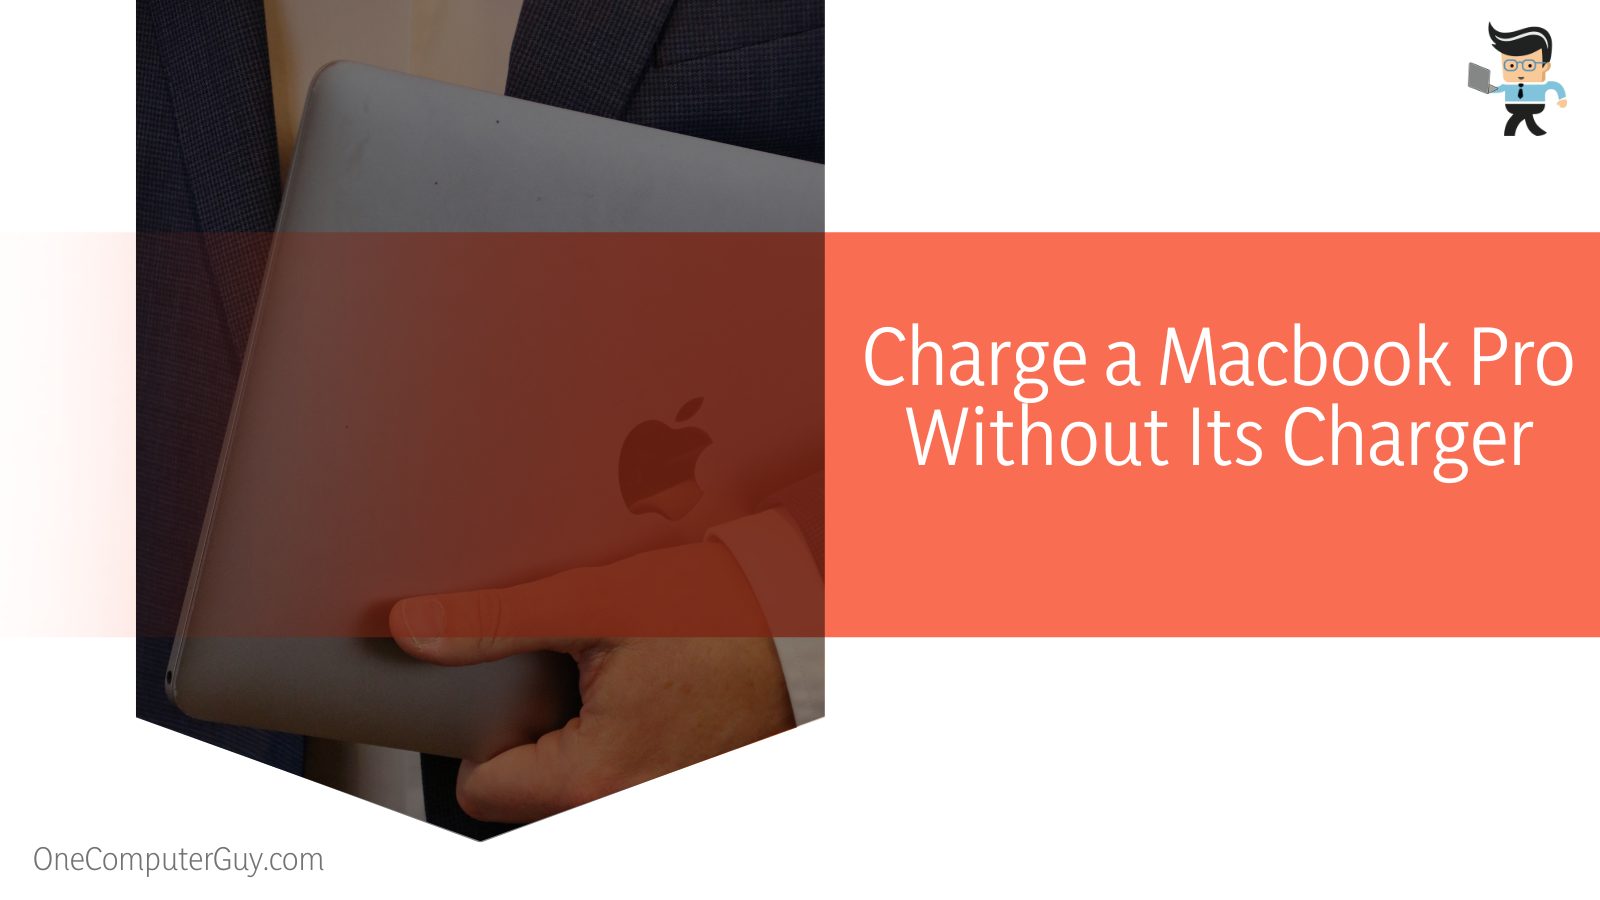 Charge a Macbook Pro Without Its Charger